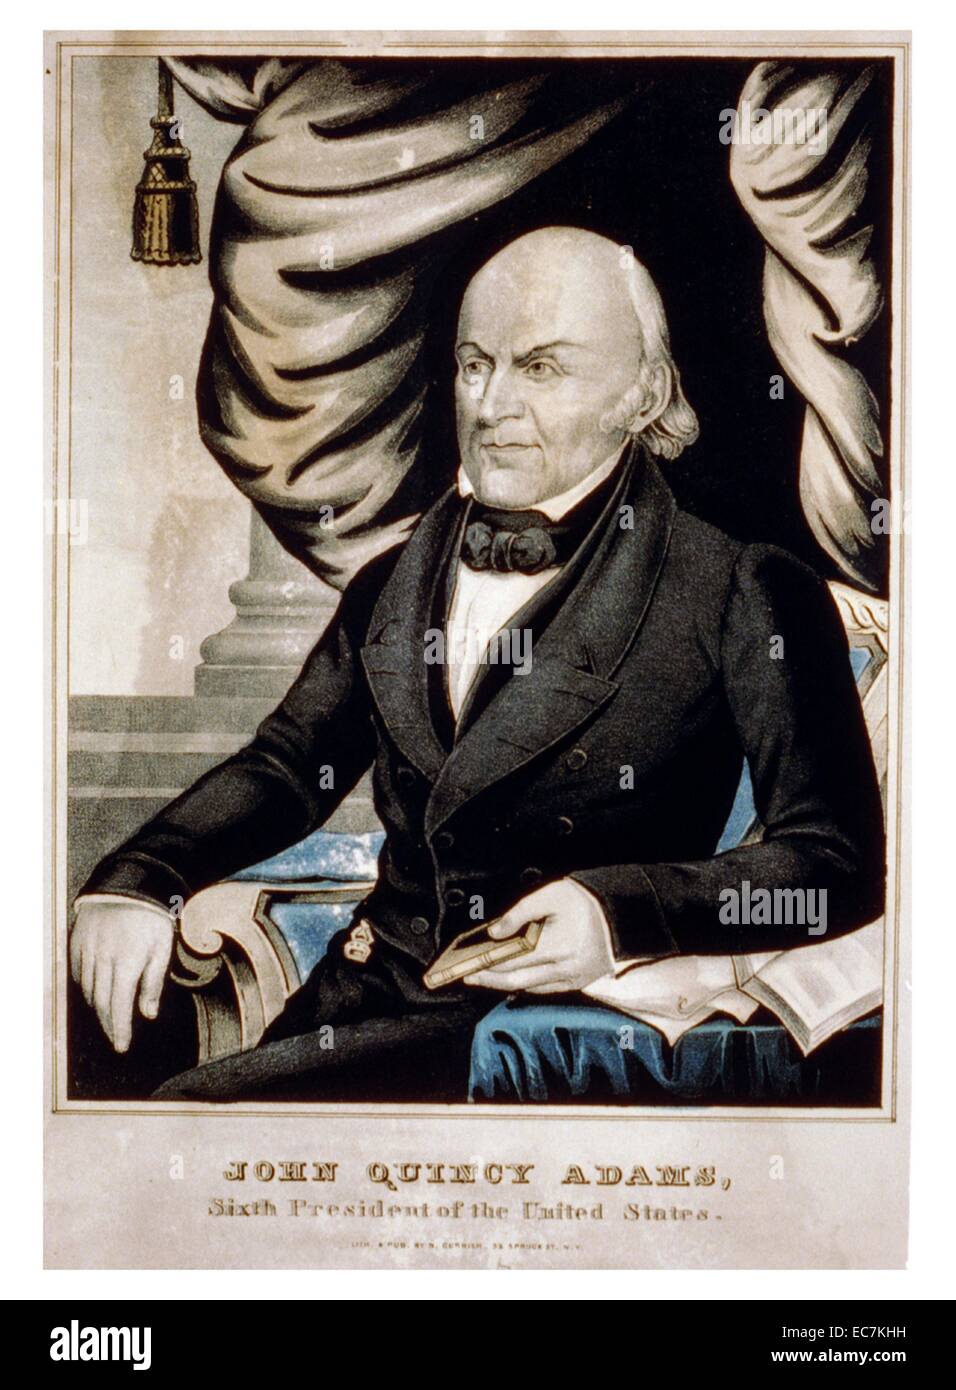 Quincy Adams, the Sixth President of the United States. He also served as a diplomat, a Senator and member of the House of Representatives. He was a member of the Federalist, Democratic-Republican, National Republican, and later Anti-Masonic and Whig parties. Stock Photo